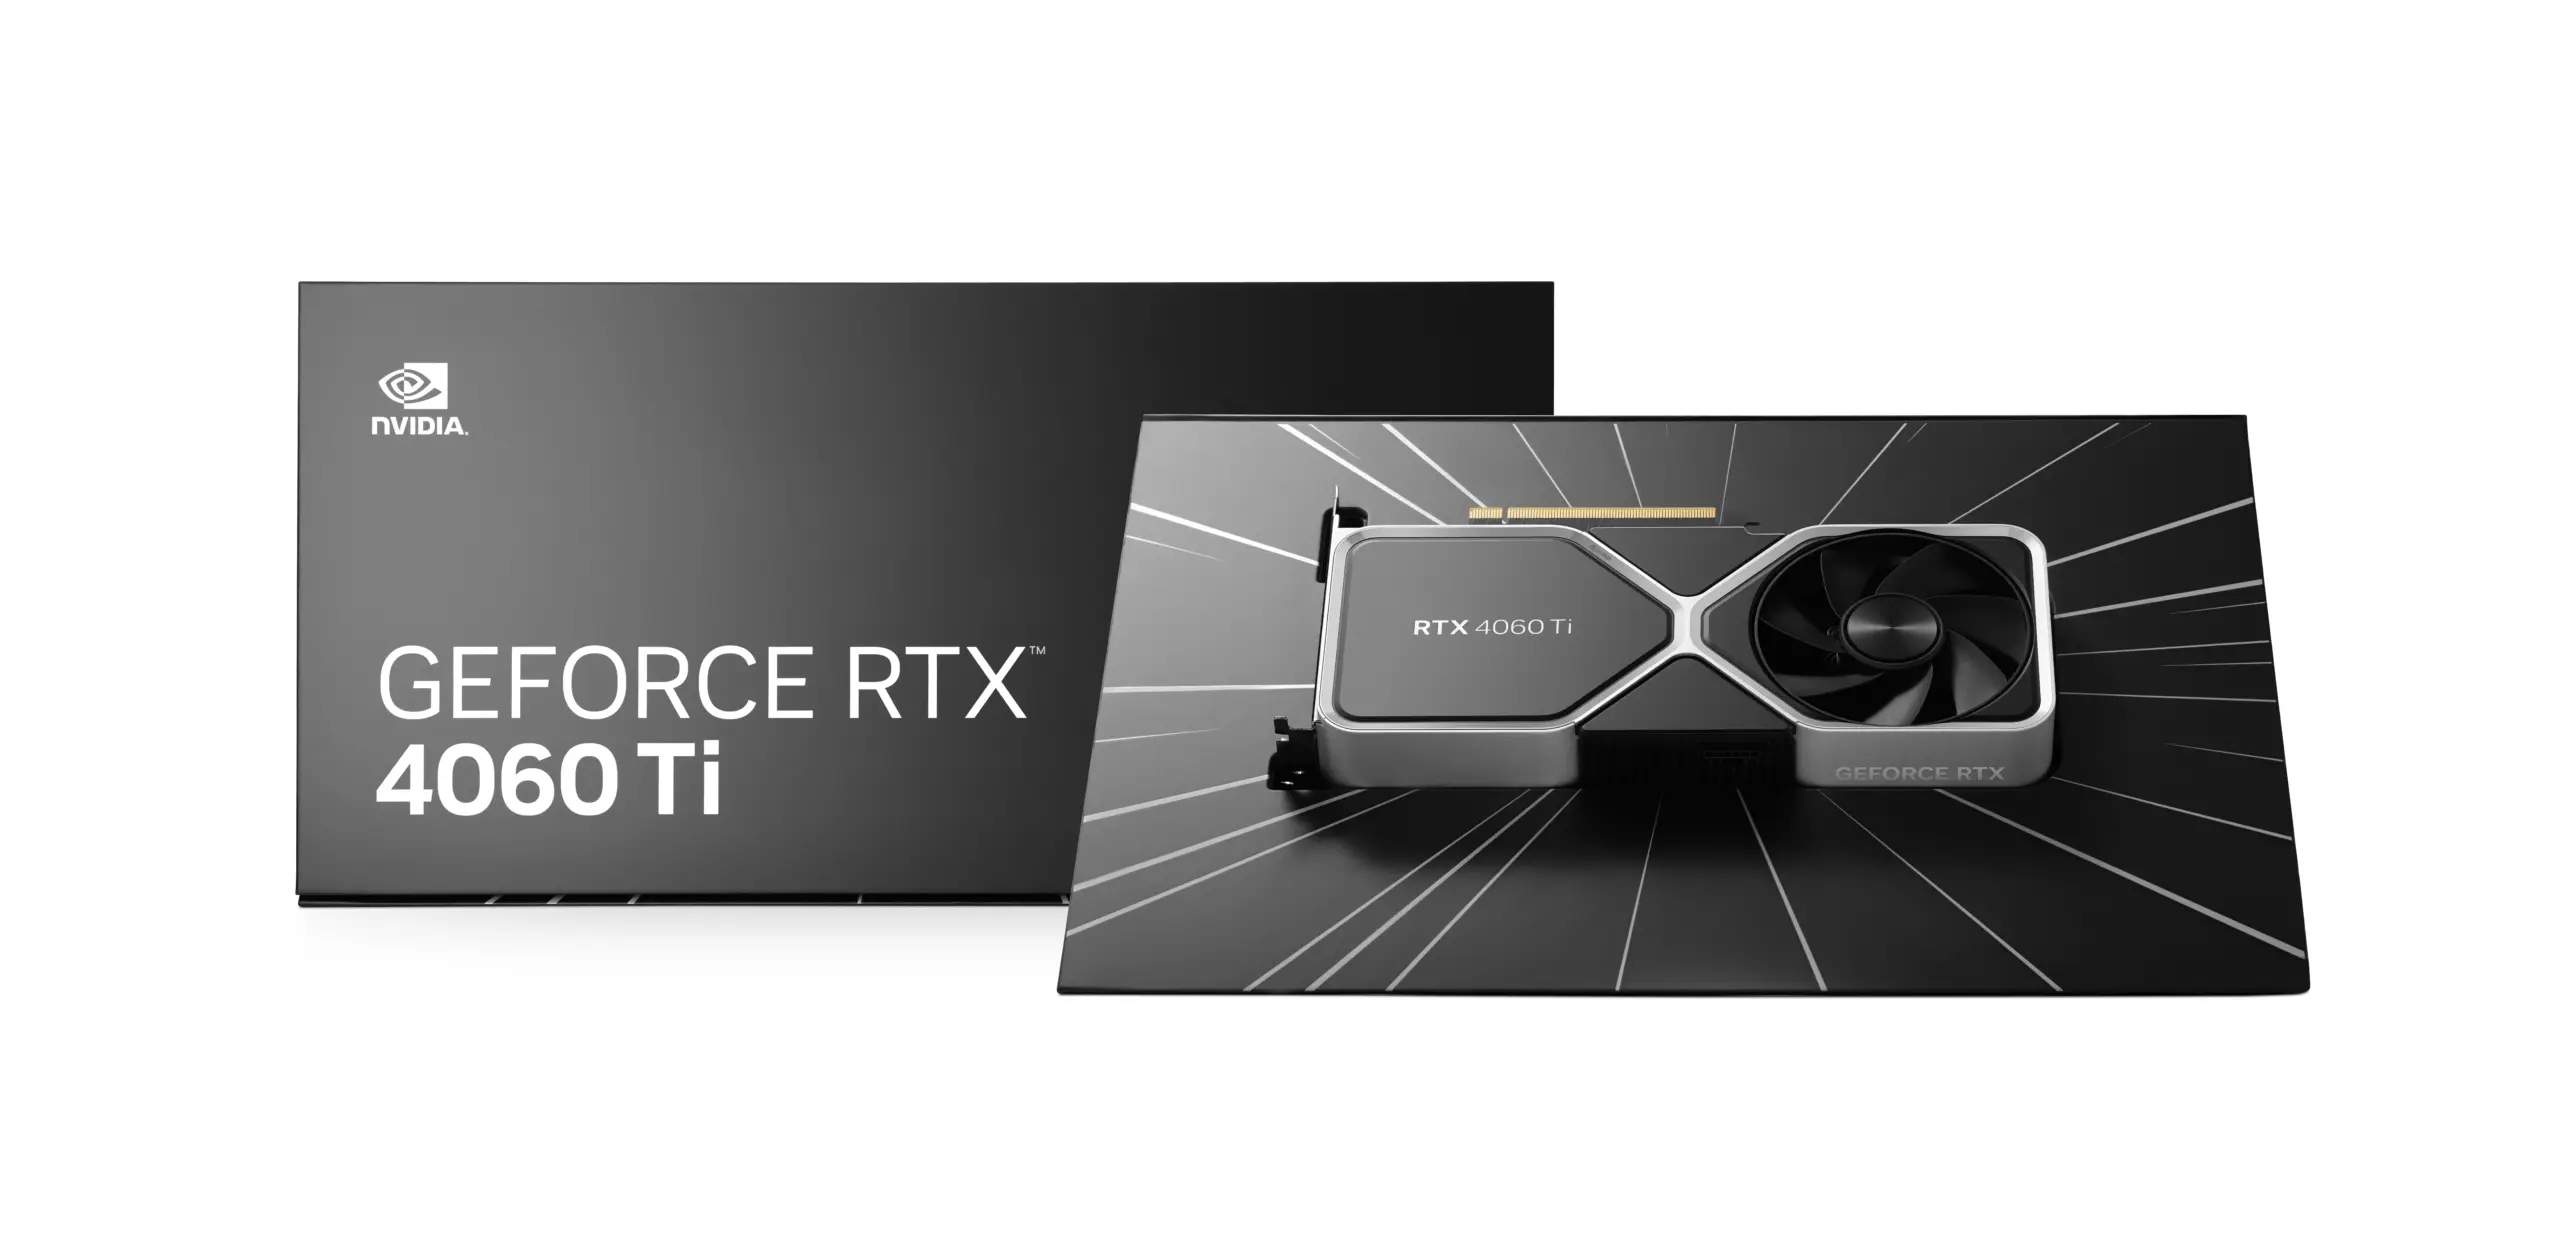 RTX 4060 Ti vs RTX 4080 - there's a gap, but how big? - PC Guide